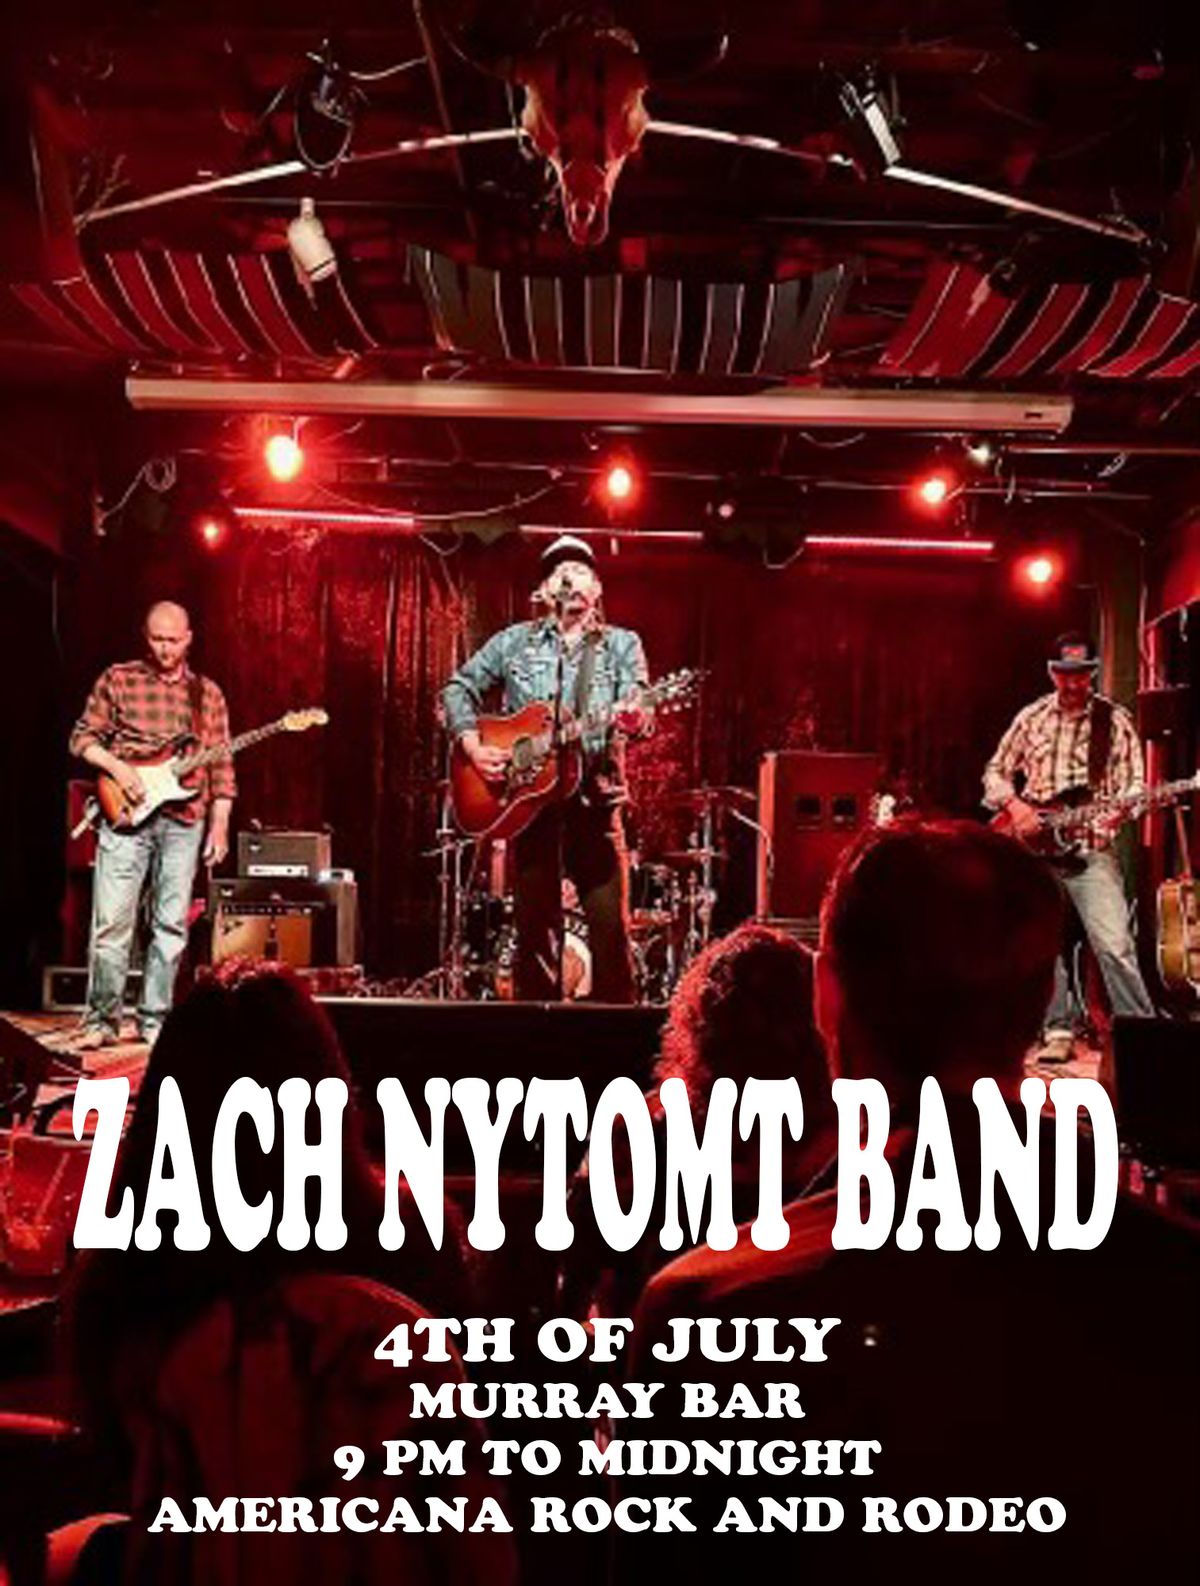 Zach Nytomt Band at The Murray Bar